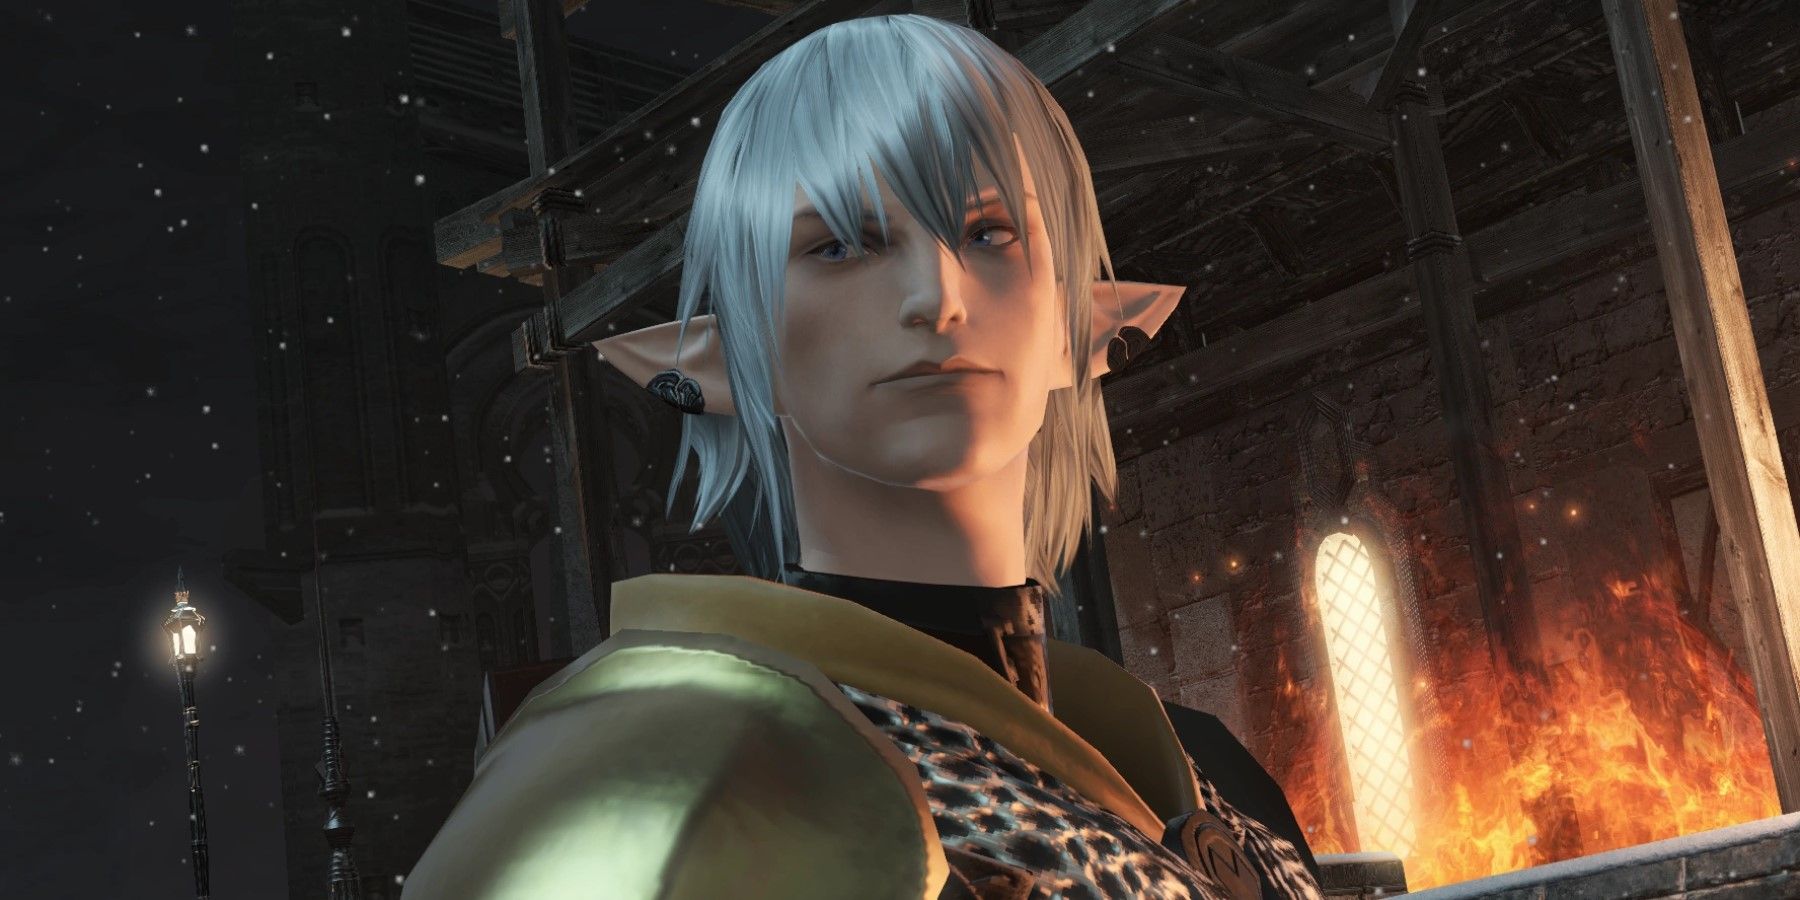 Final Fantasy 14 Duty Support System Adds Beloved NPCs to Heavensward Dungeons